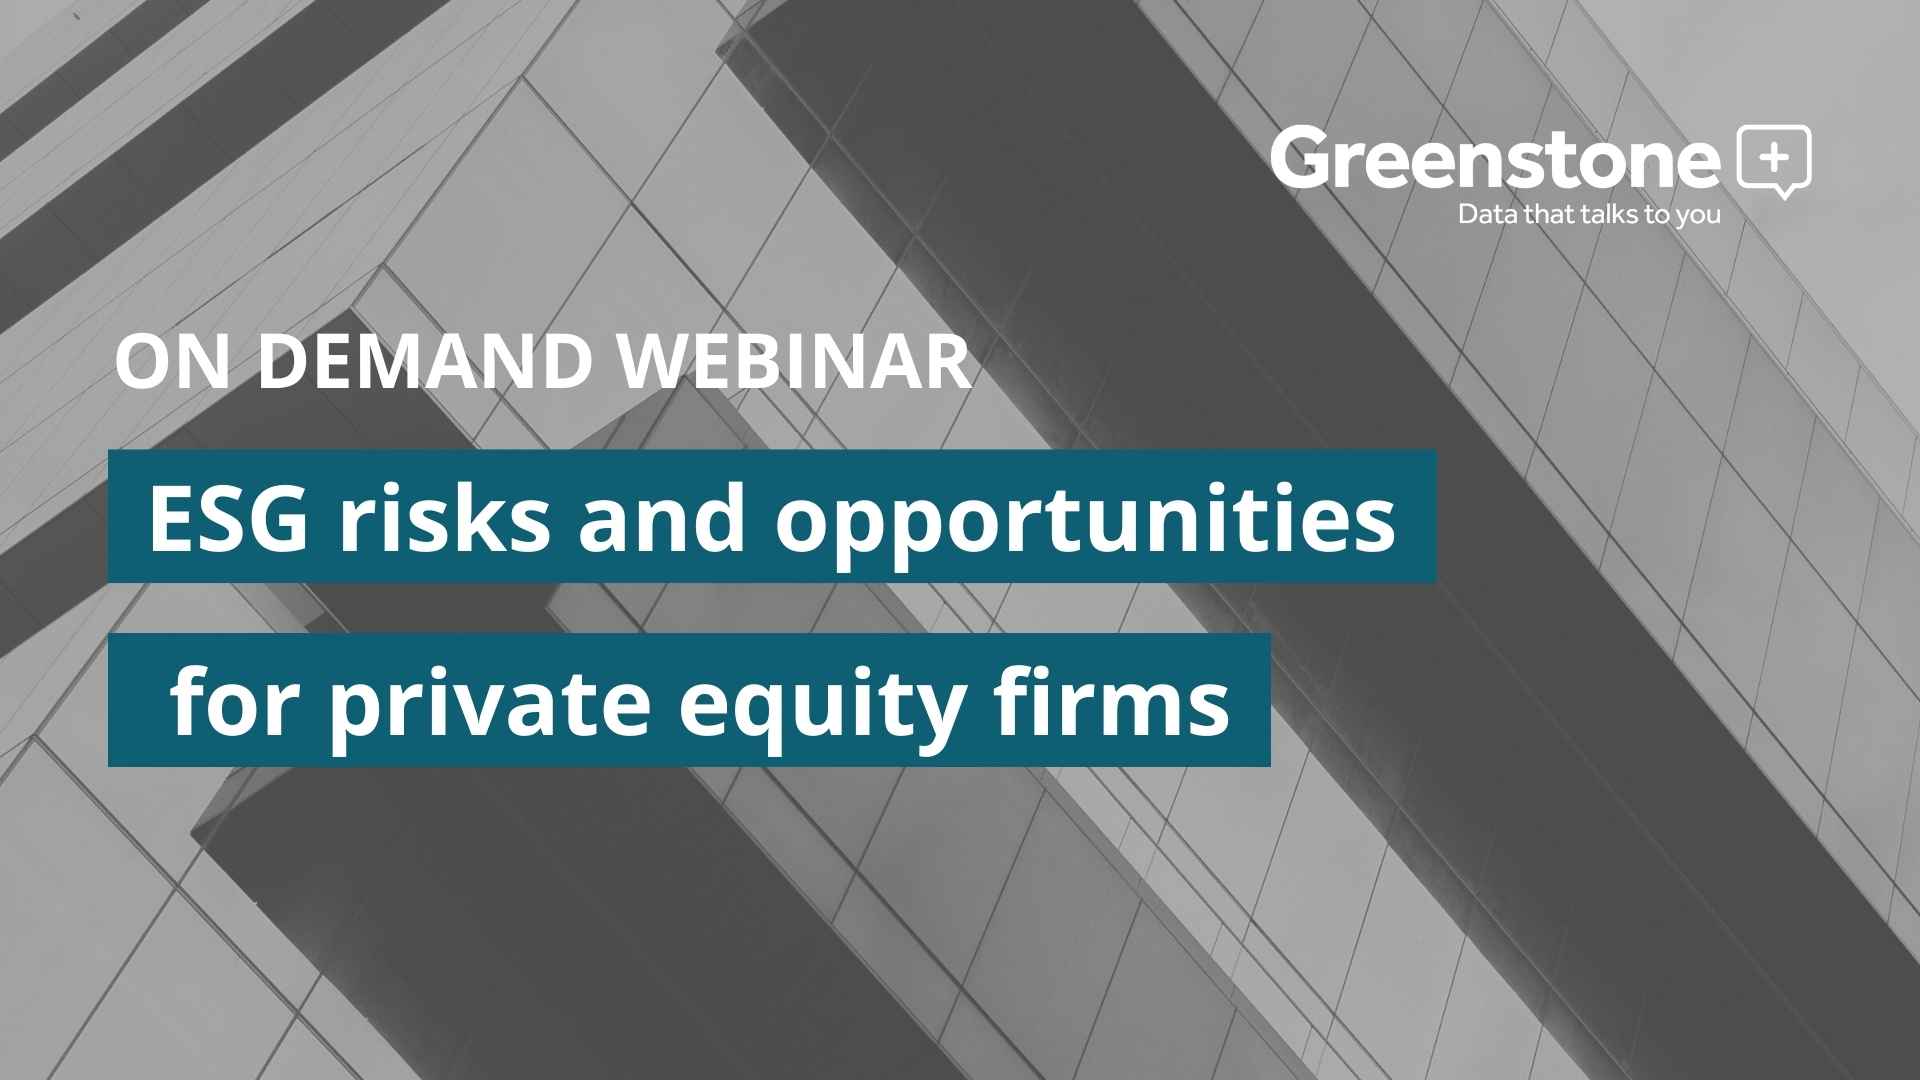 ESG risks and opportunities for private equity firms